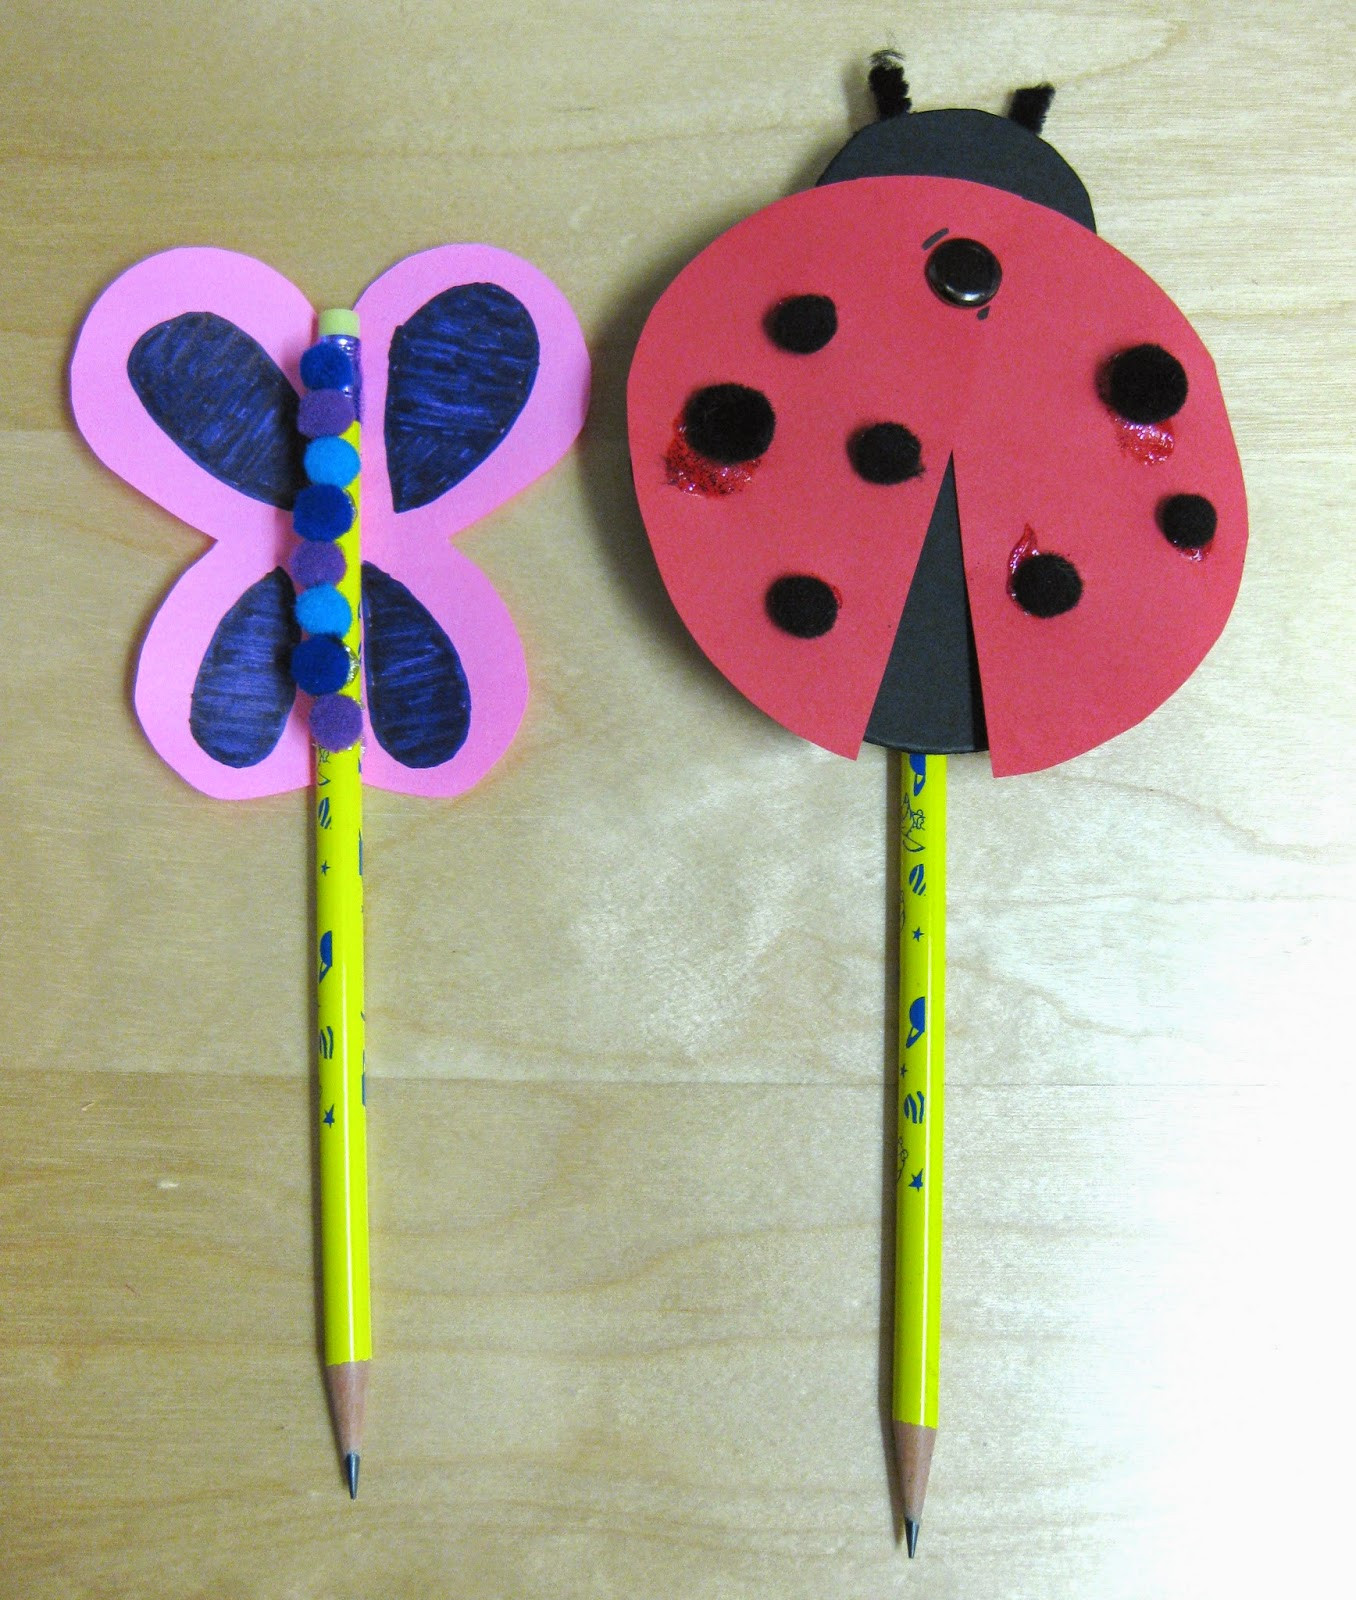 Arts And Crafts Easy Ideas For Kids
 pencil craft ideas for kids Art Craft Gift Ideas